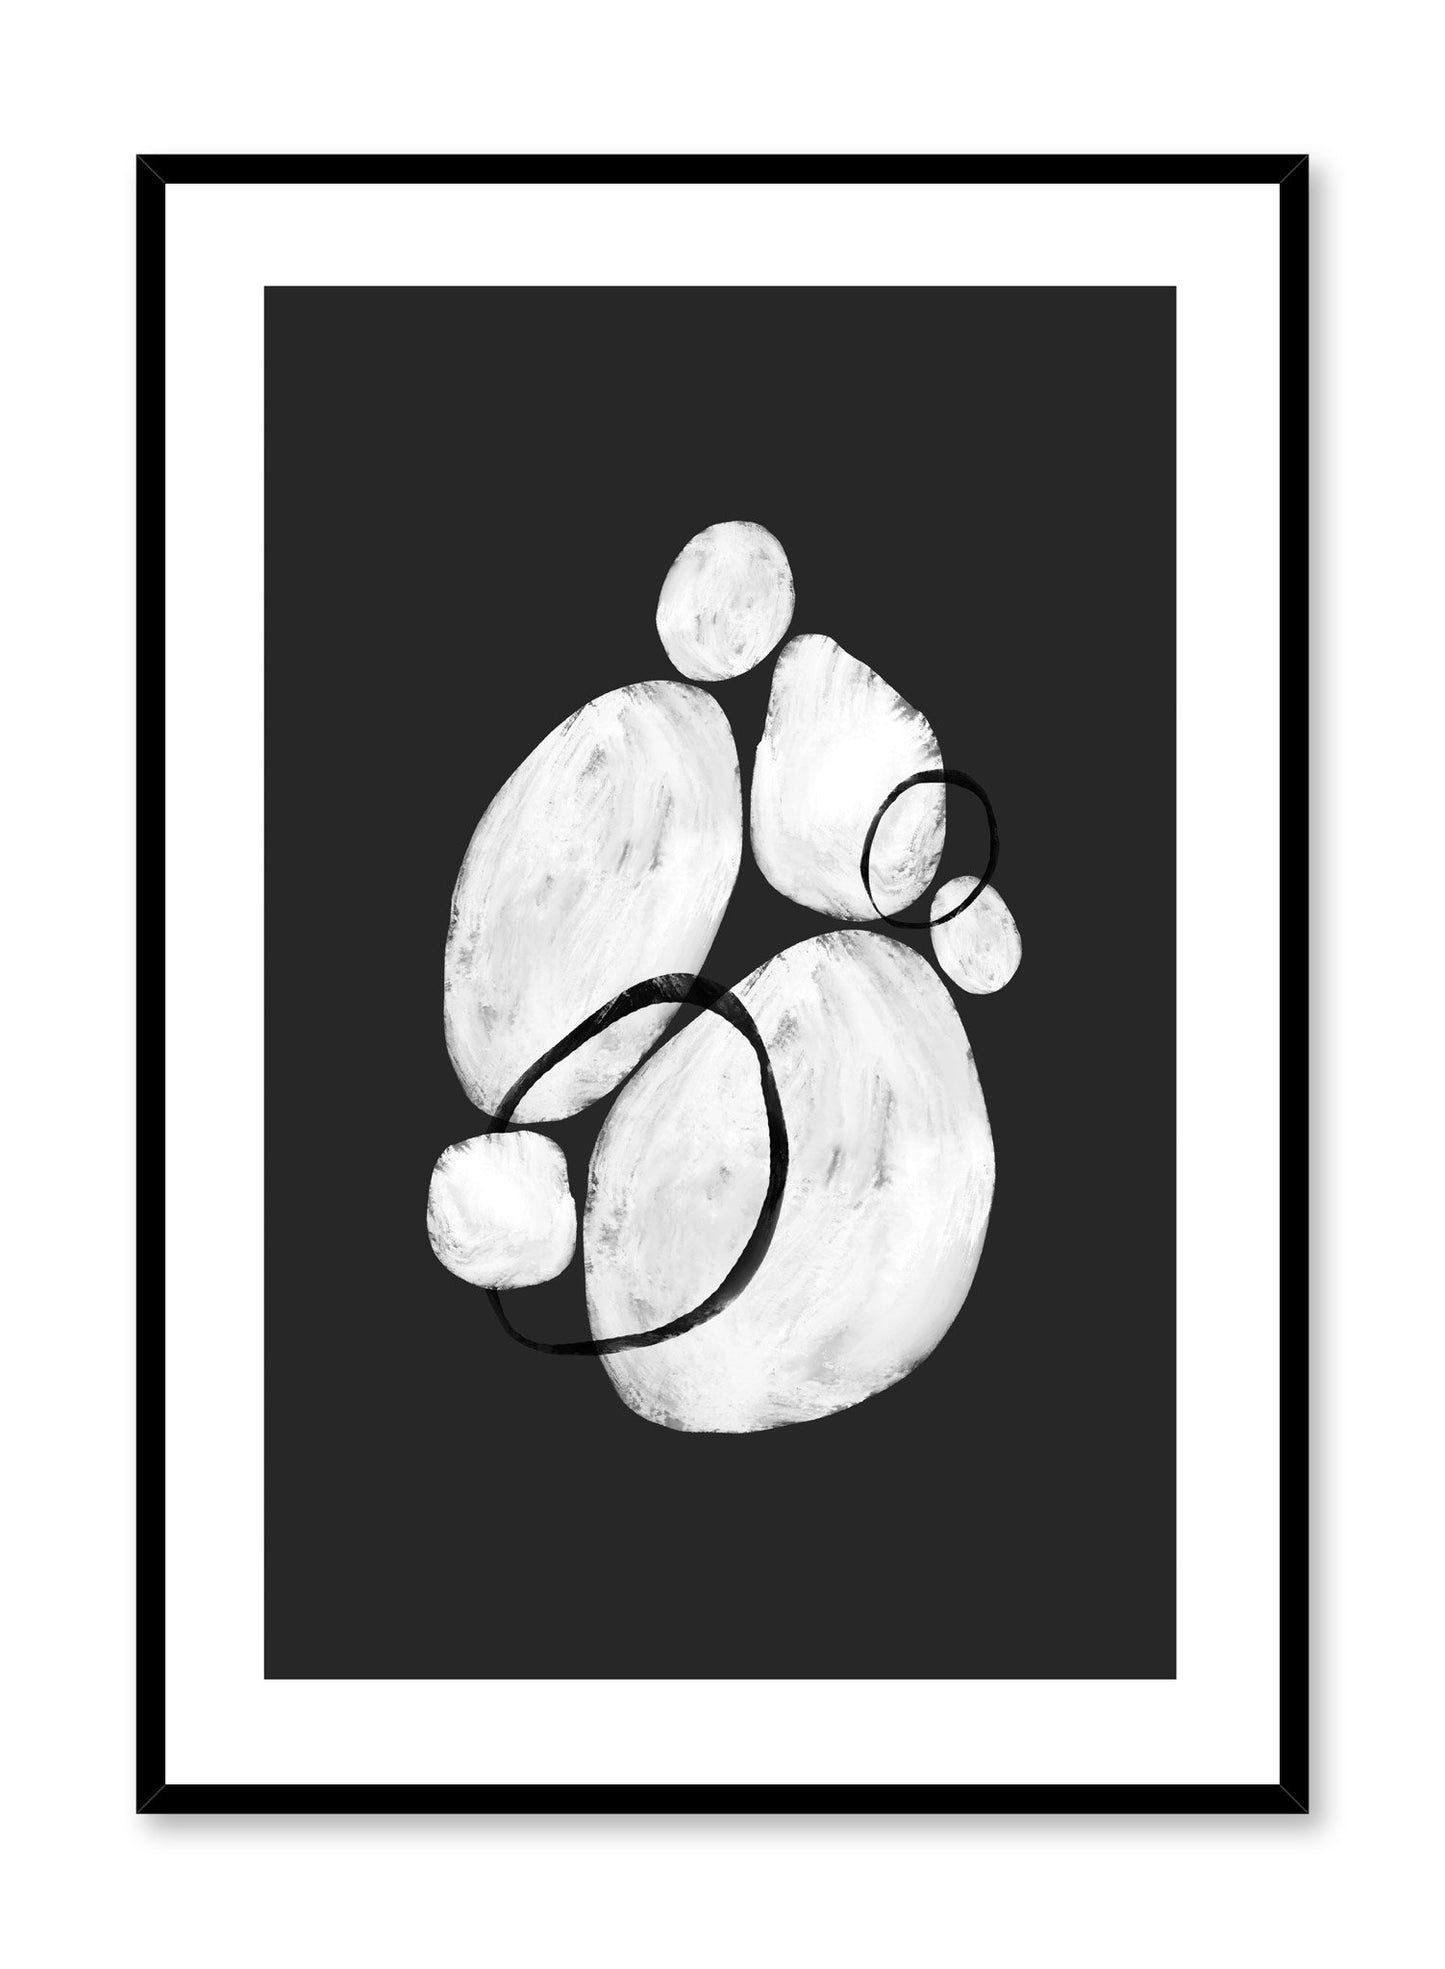 Modern minimalist poster by Opposite Wall with graphic illustration of pebbles